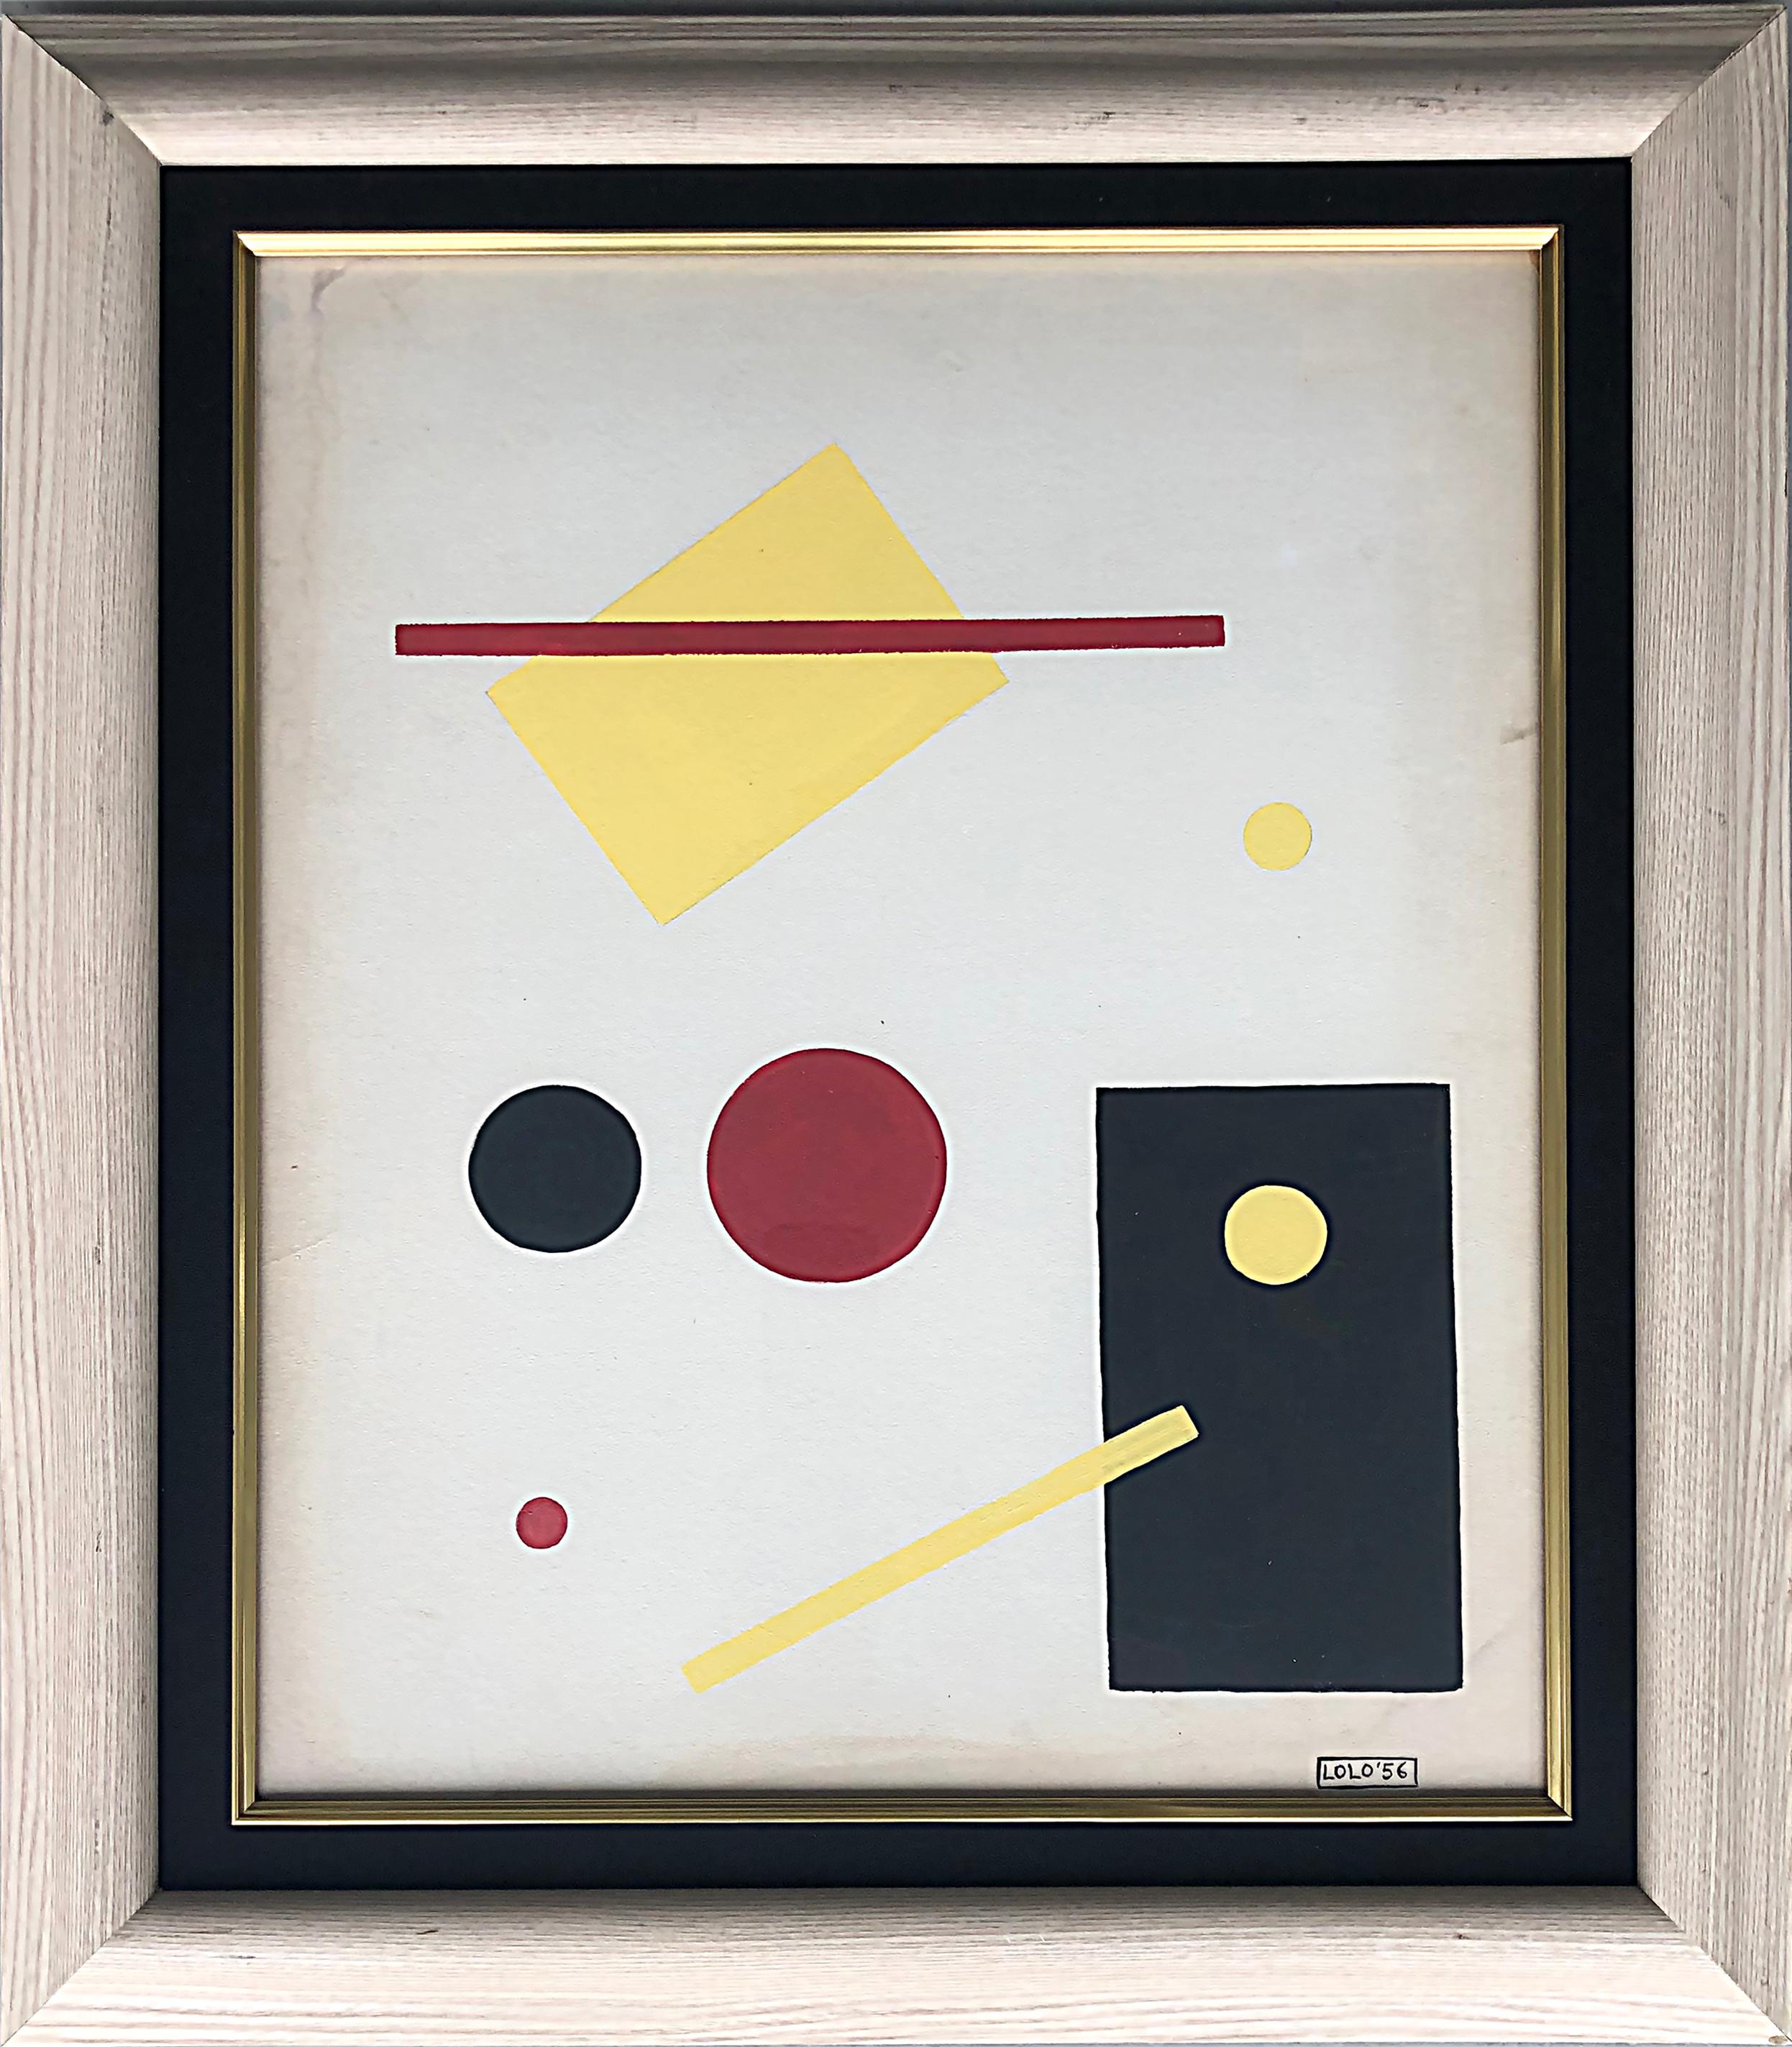 Painted Lolo 'Dolores' Soldevilla Cuban Geometric Oil Painting, Signed & Dated 1956